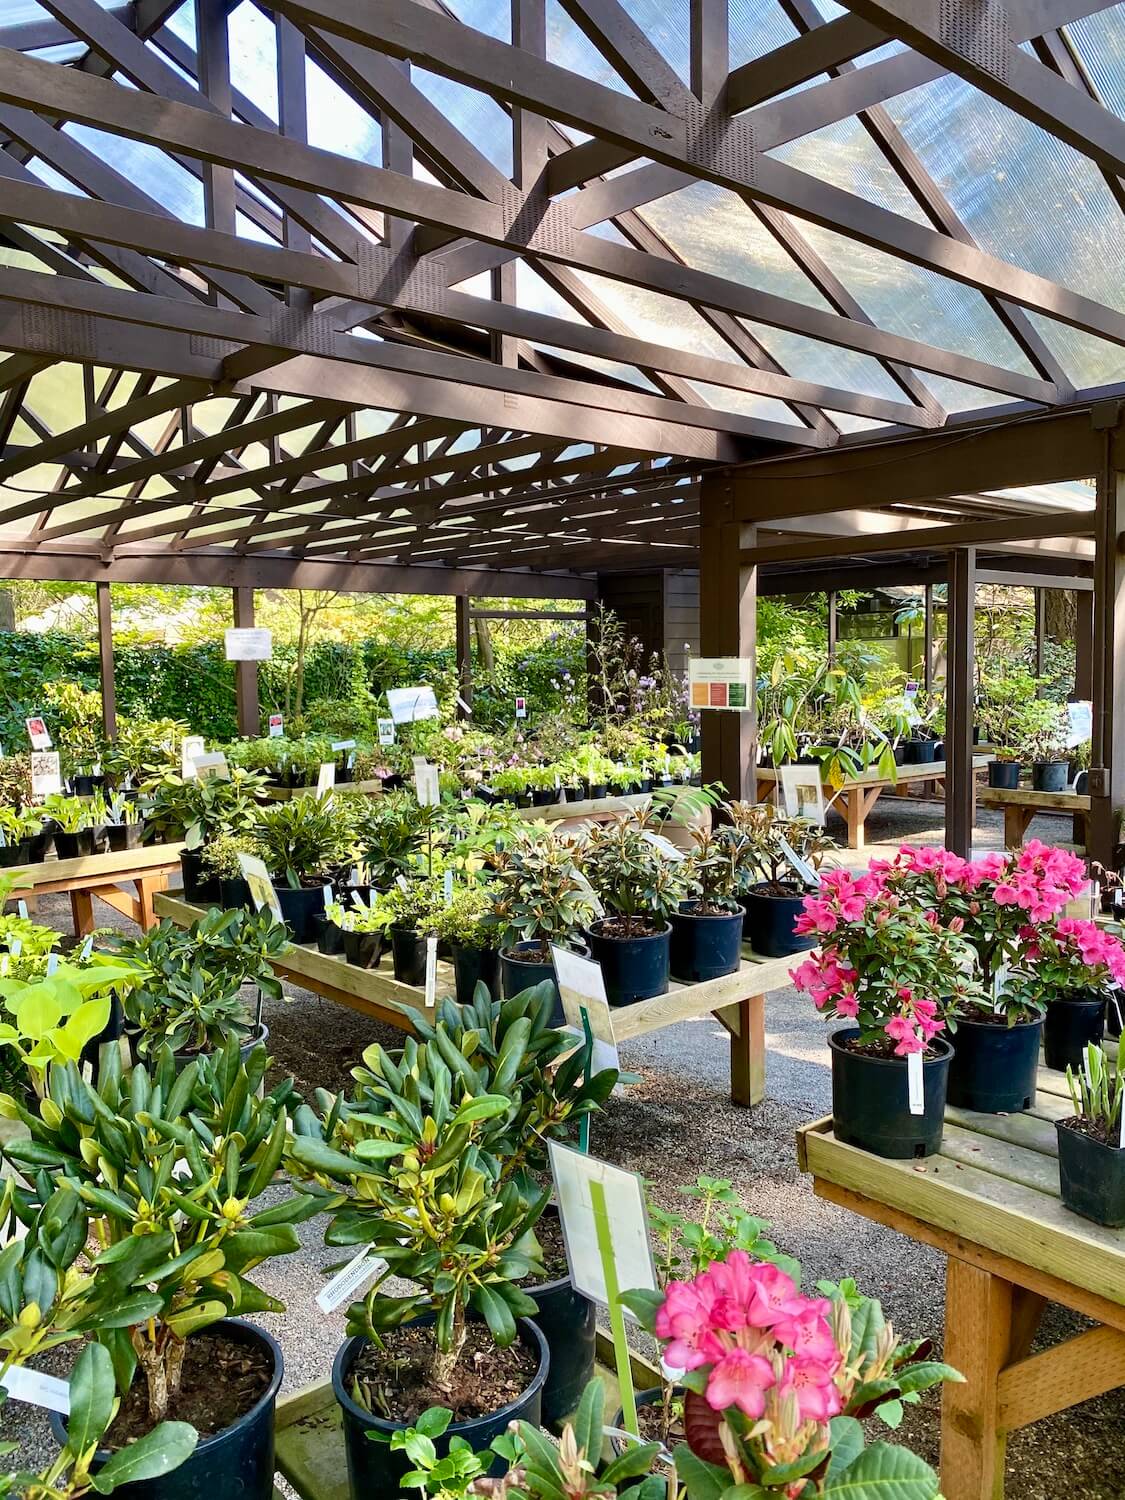 The plant pop-up sale at the Rhododendron Species Botanical Garden is popular with local gardeners.  Here there are several pink flowering plants amongst many varieties of hosts and other textured plants.  The brown wood frame holds together clear plastic roofing that allows in a lot of light. 